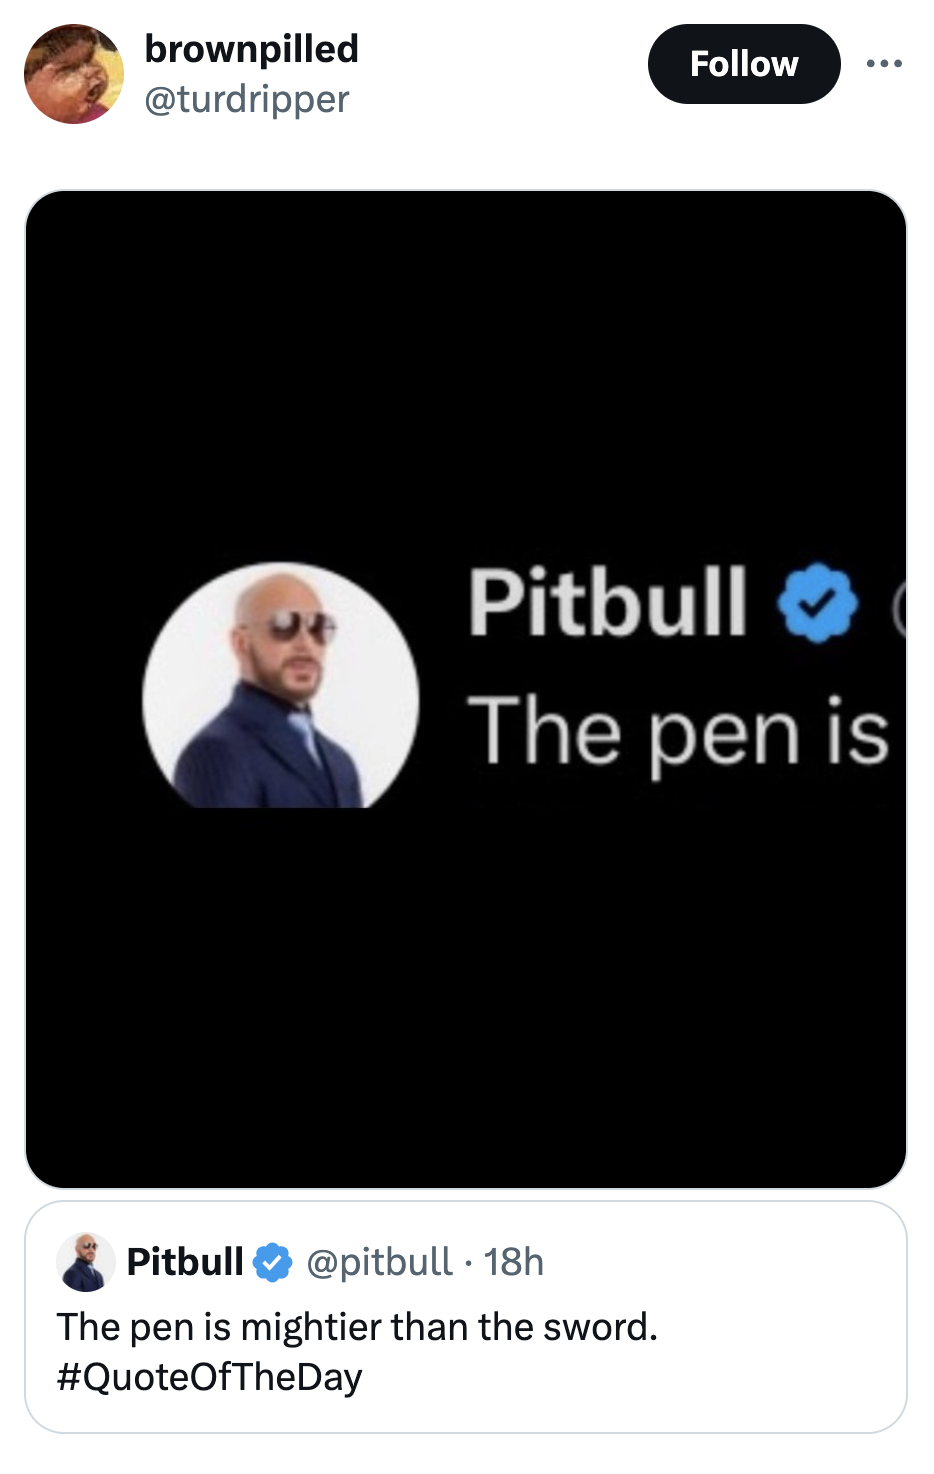 screenshot - brownpilled ... Pitbull The pen is Pitbull . 18h The pen is mightier than the sword.